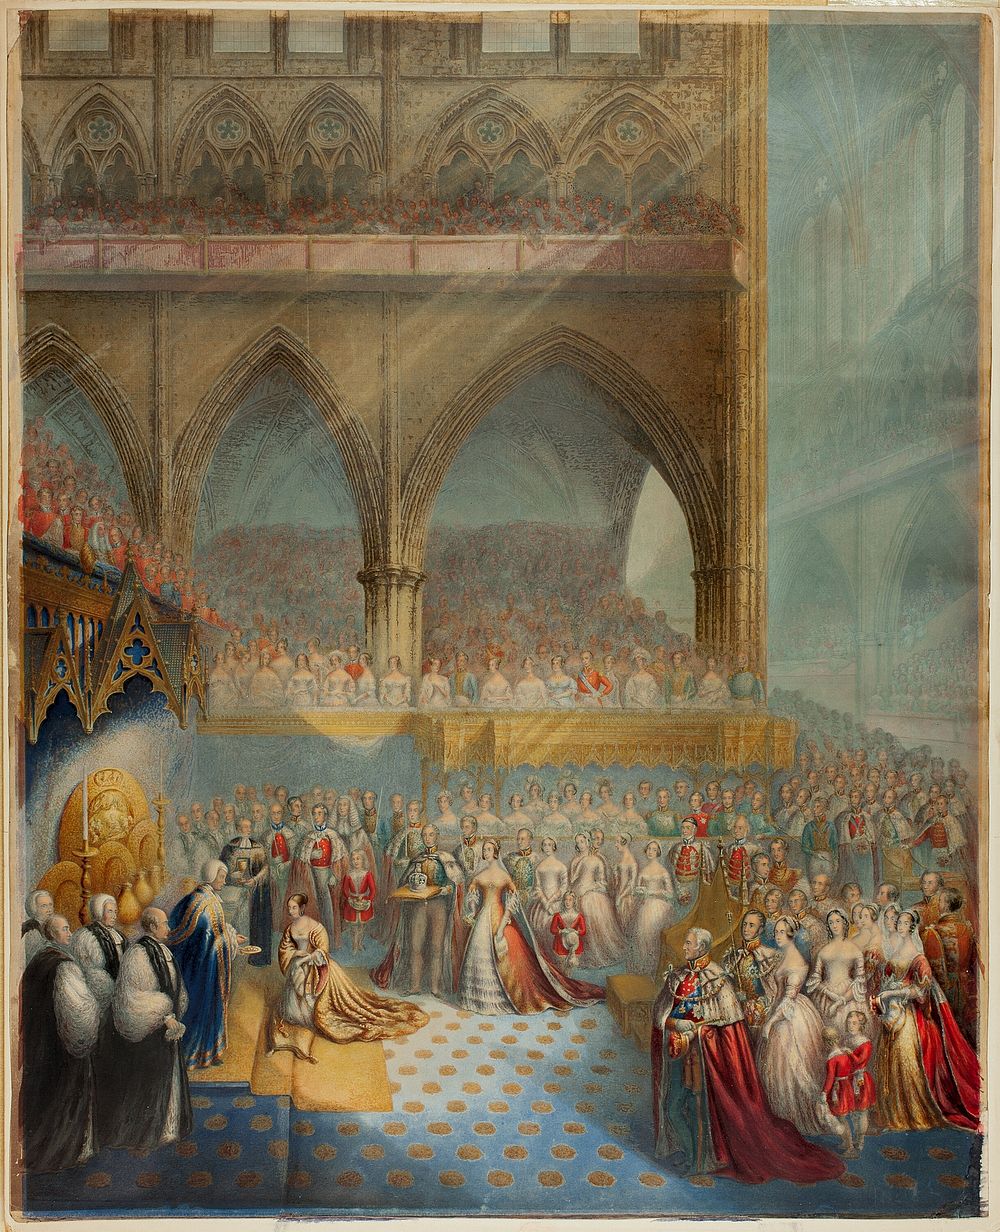 Her Most Gracious Majesty Queen Victoria Receiving the Sacrament at her Coronation by George Baxter